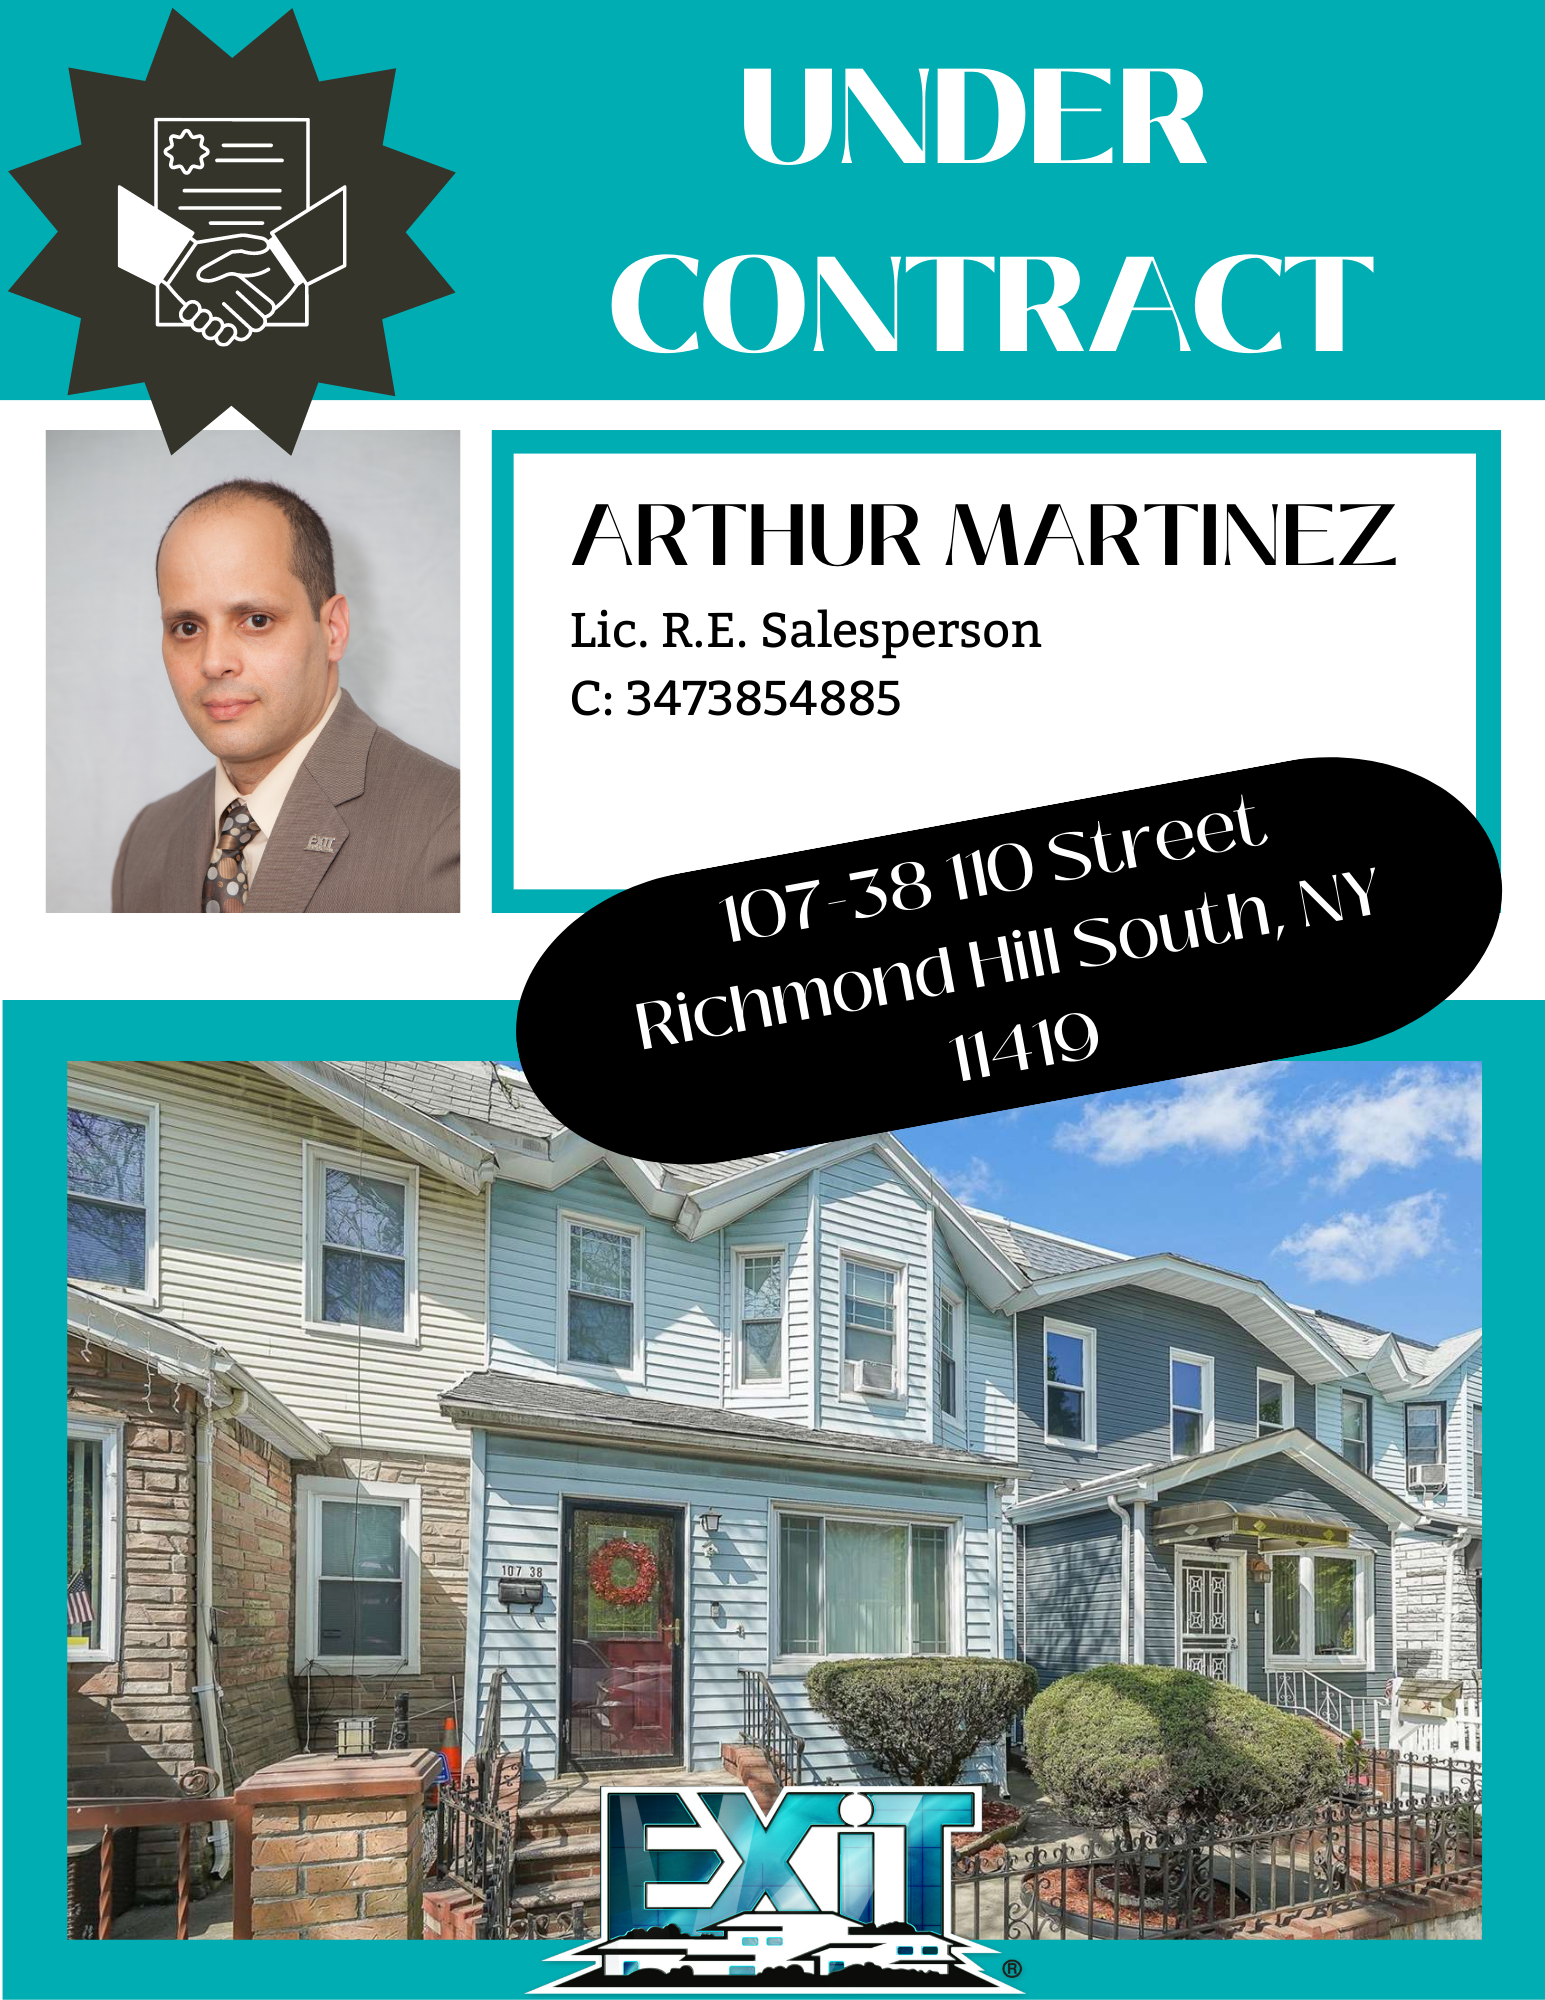 Under Contract by Arthur Martinez